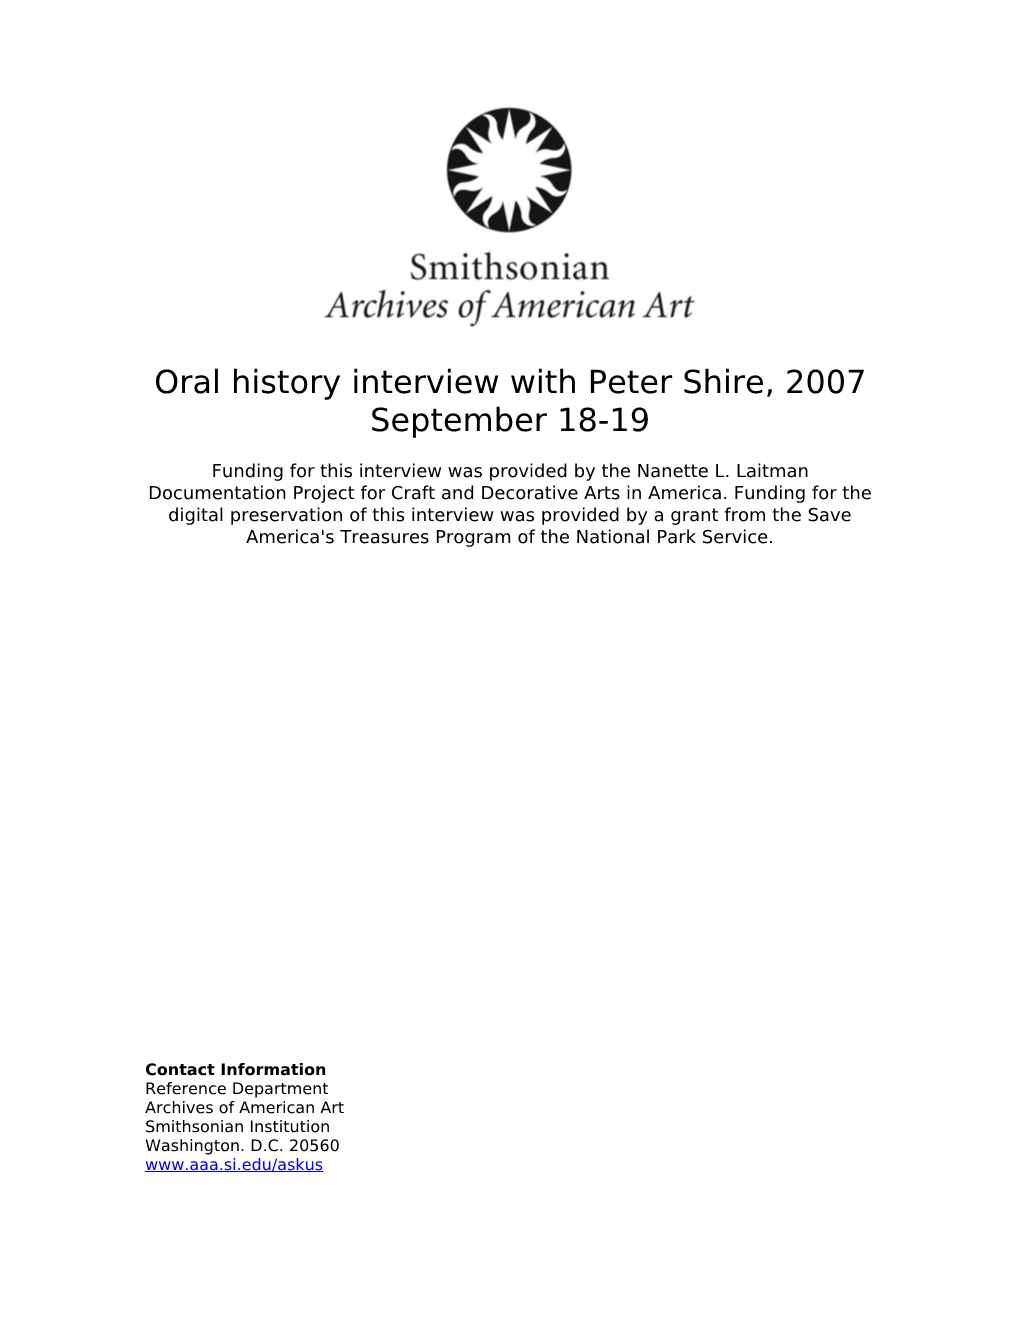 Oral History Interview with Peter Shire, 2007 September 18-19